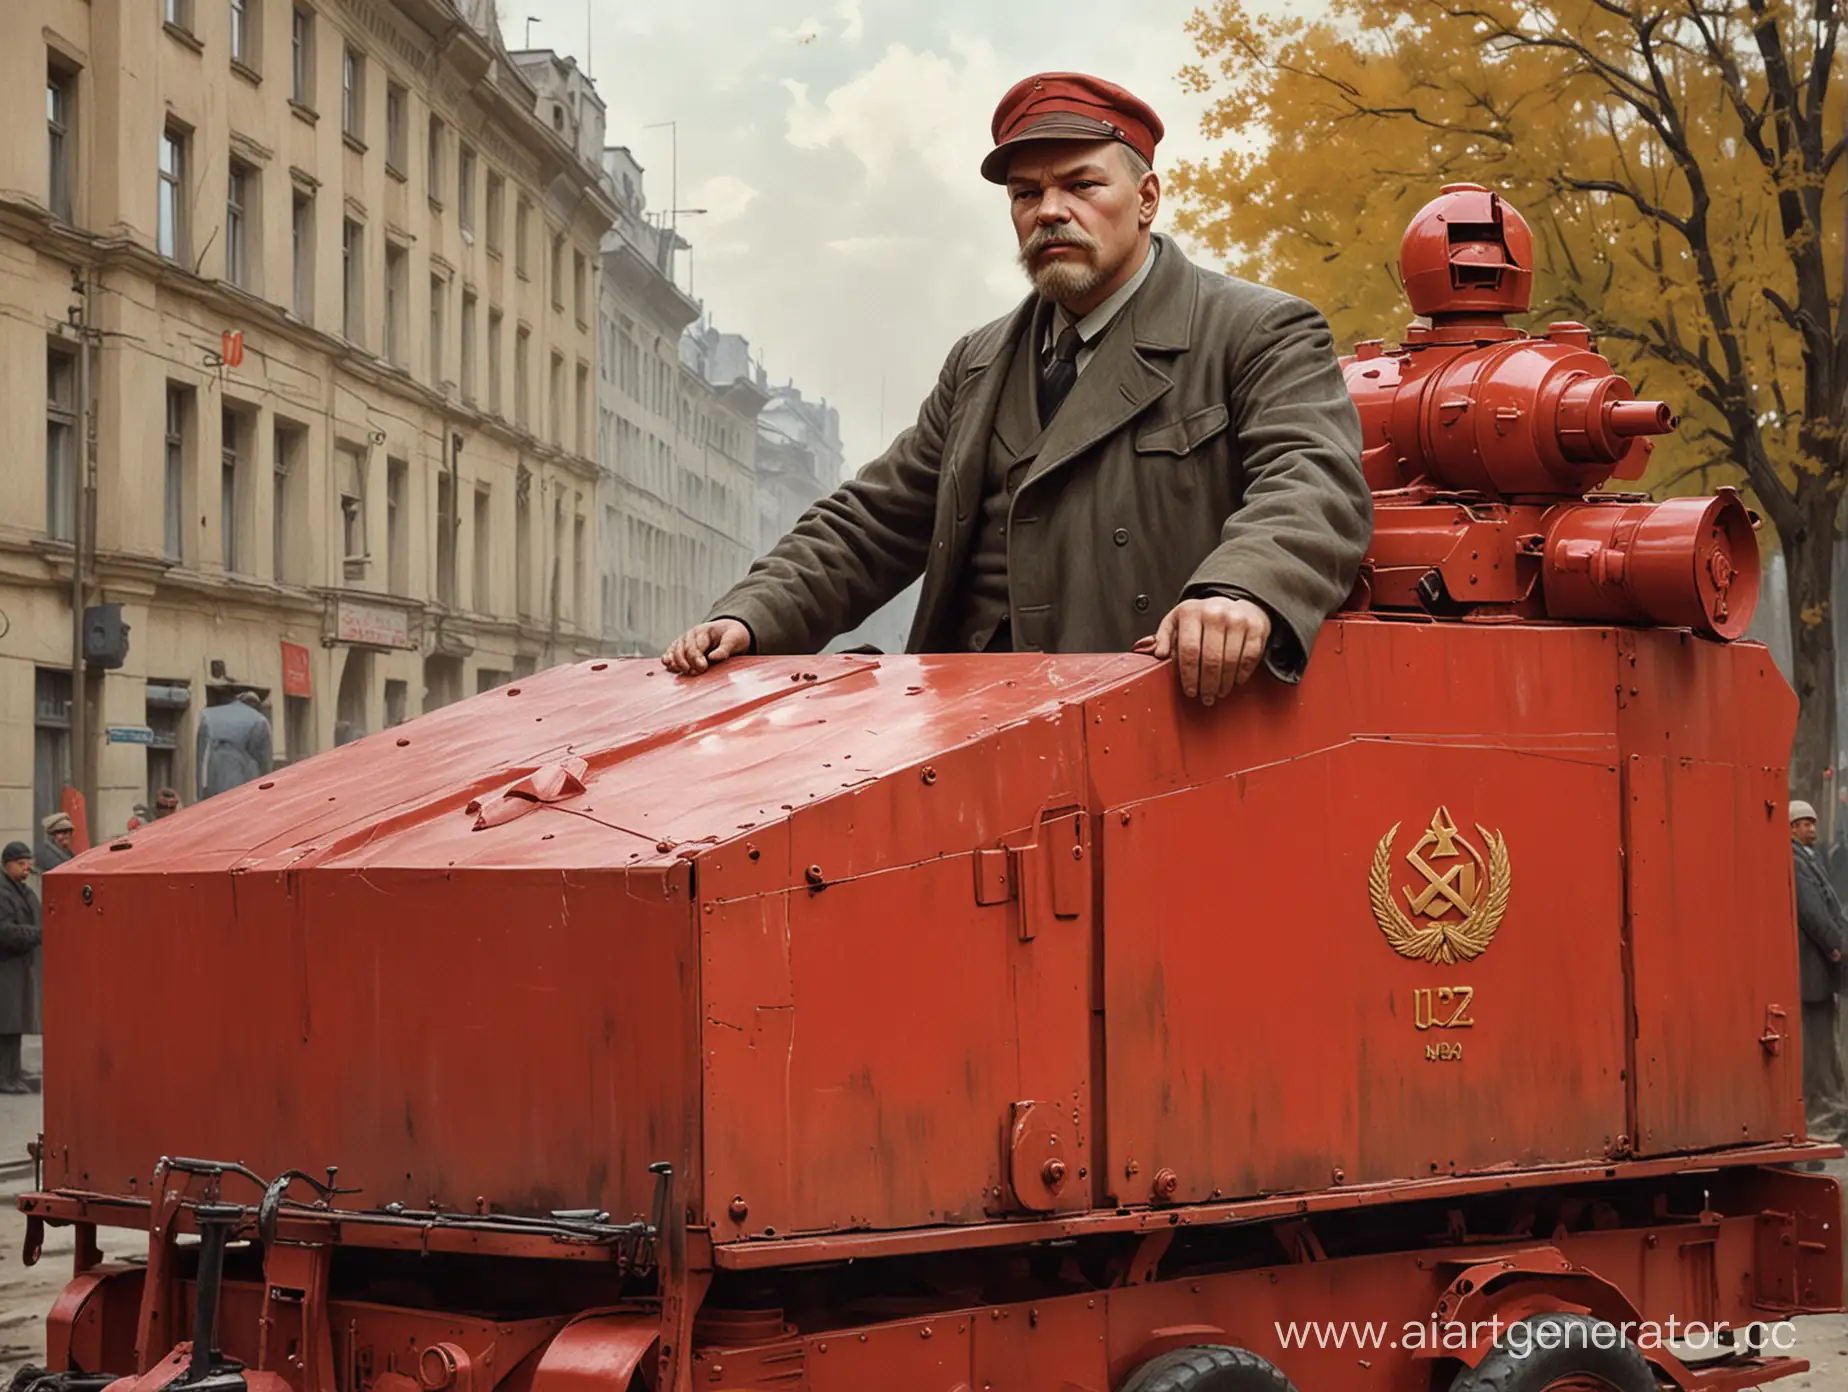 Historic-Moment-Lenin-Rallying-the-Crowd-on-a-Red-Armored-Vehicle